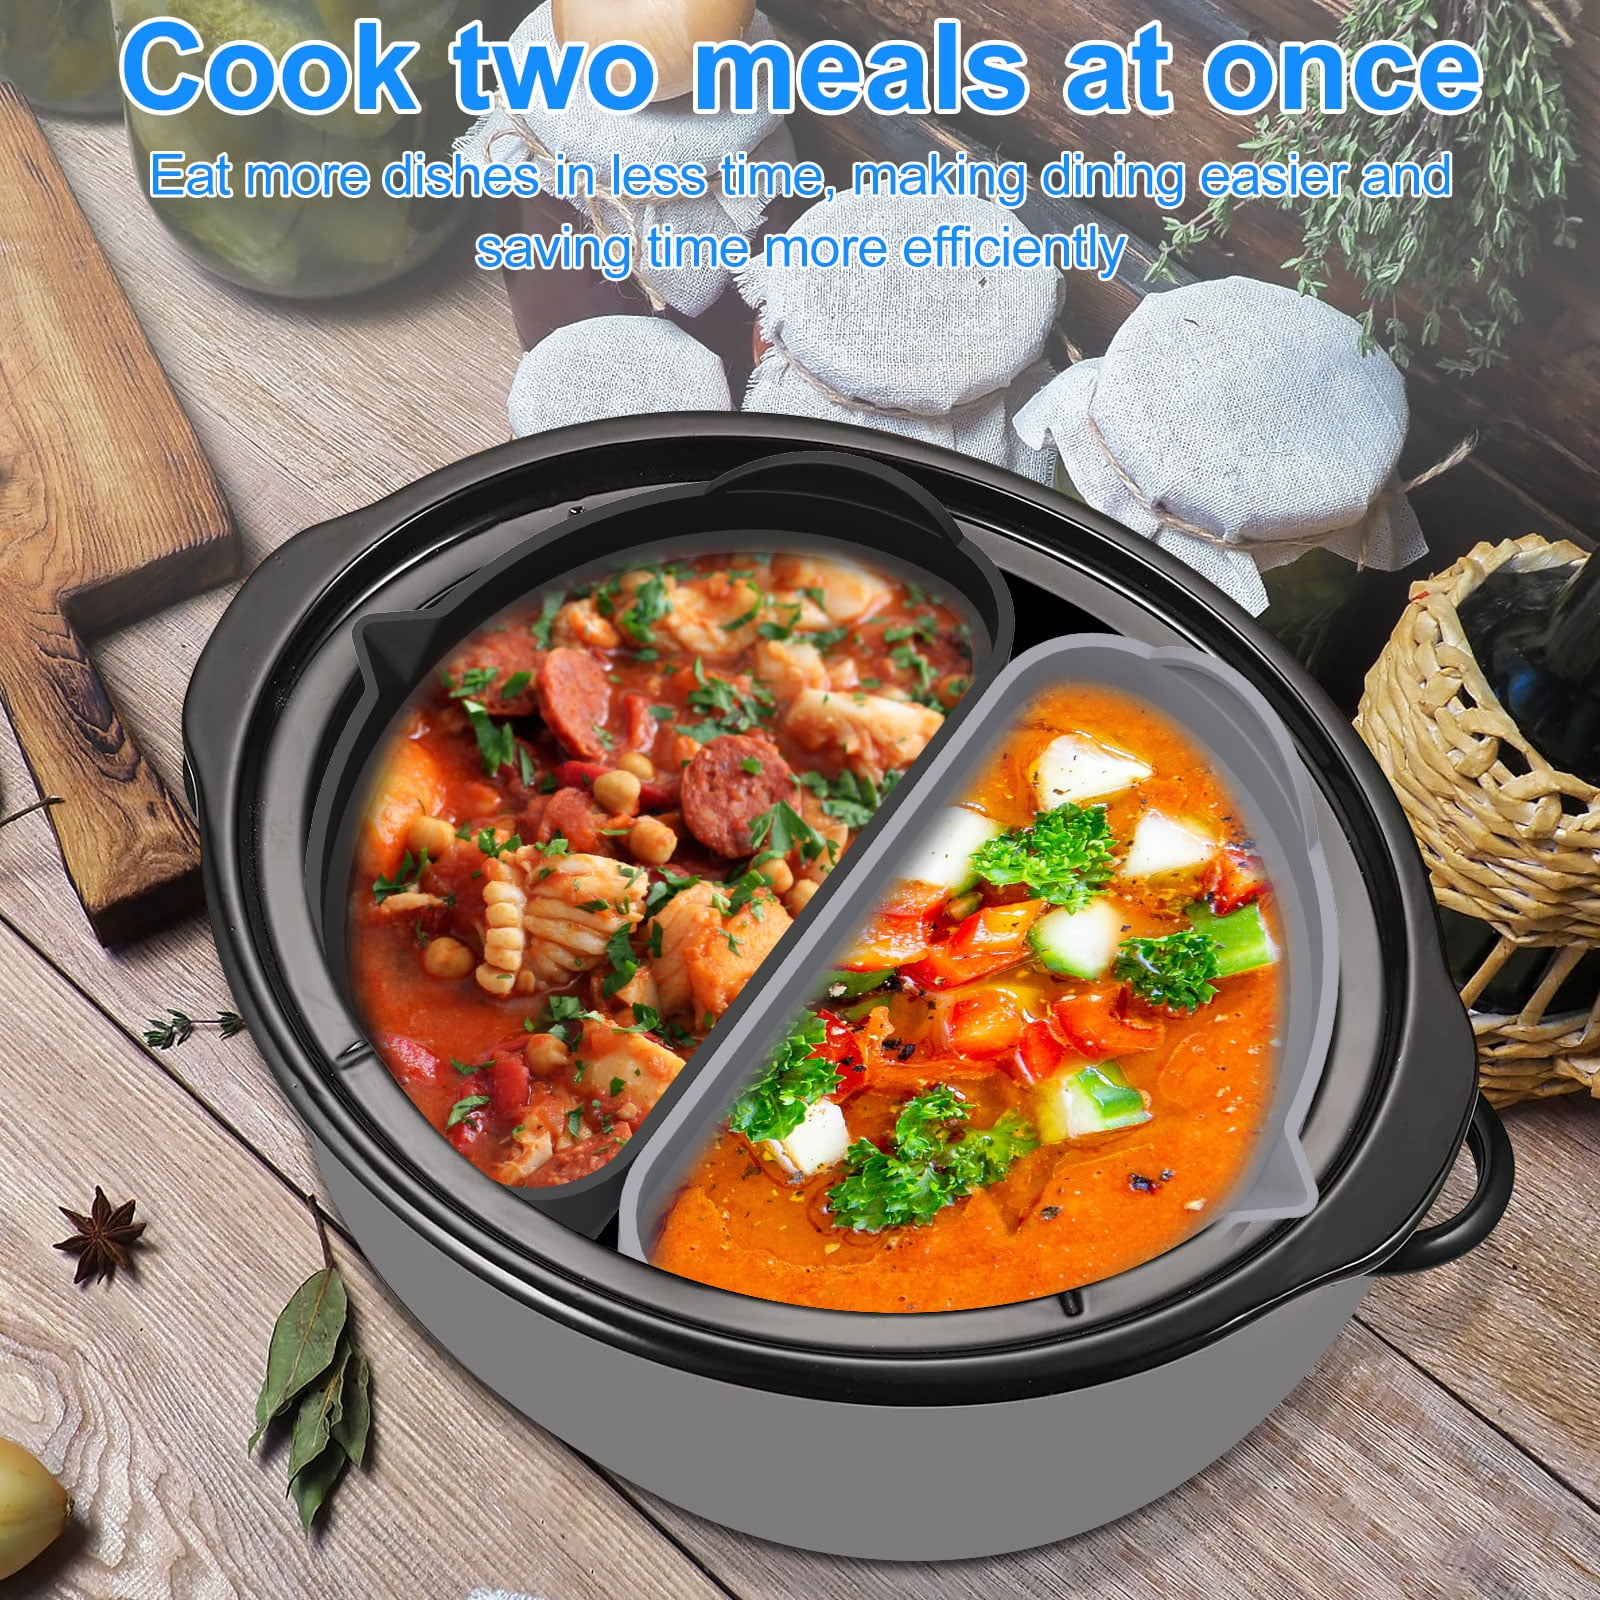 hoomdabox RNAB0BY49WJYQ 2-in-1 silicone slow cooker liners fit for 6-7 qt  crockpot, silicone slow cooker divider liner, reusable/bpa free/leakproof/s